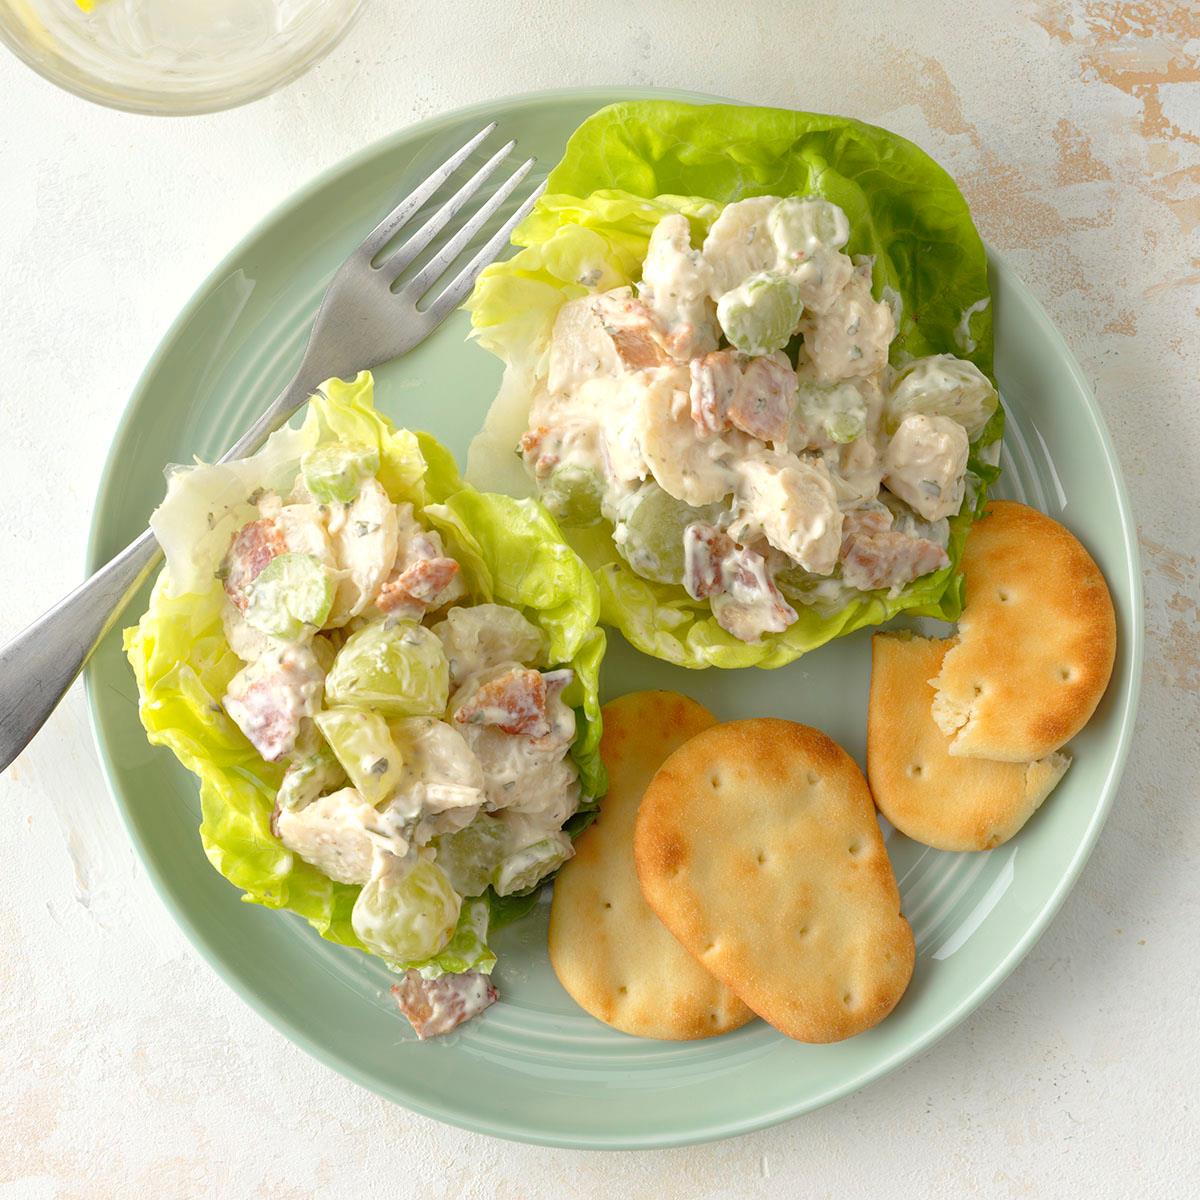 Hot Chicken Salad Recipe With Water Chestnuts - Crissy Morgan